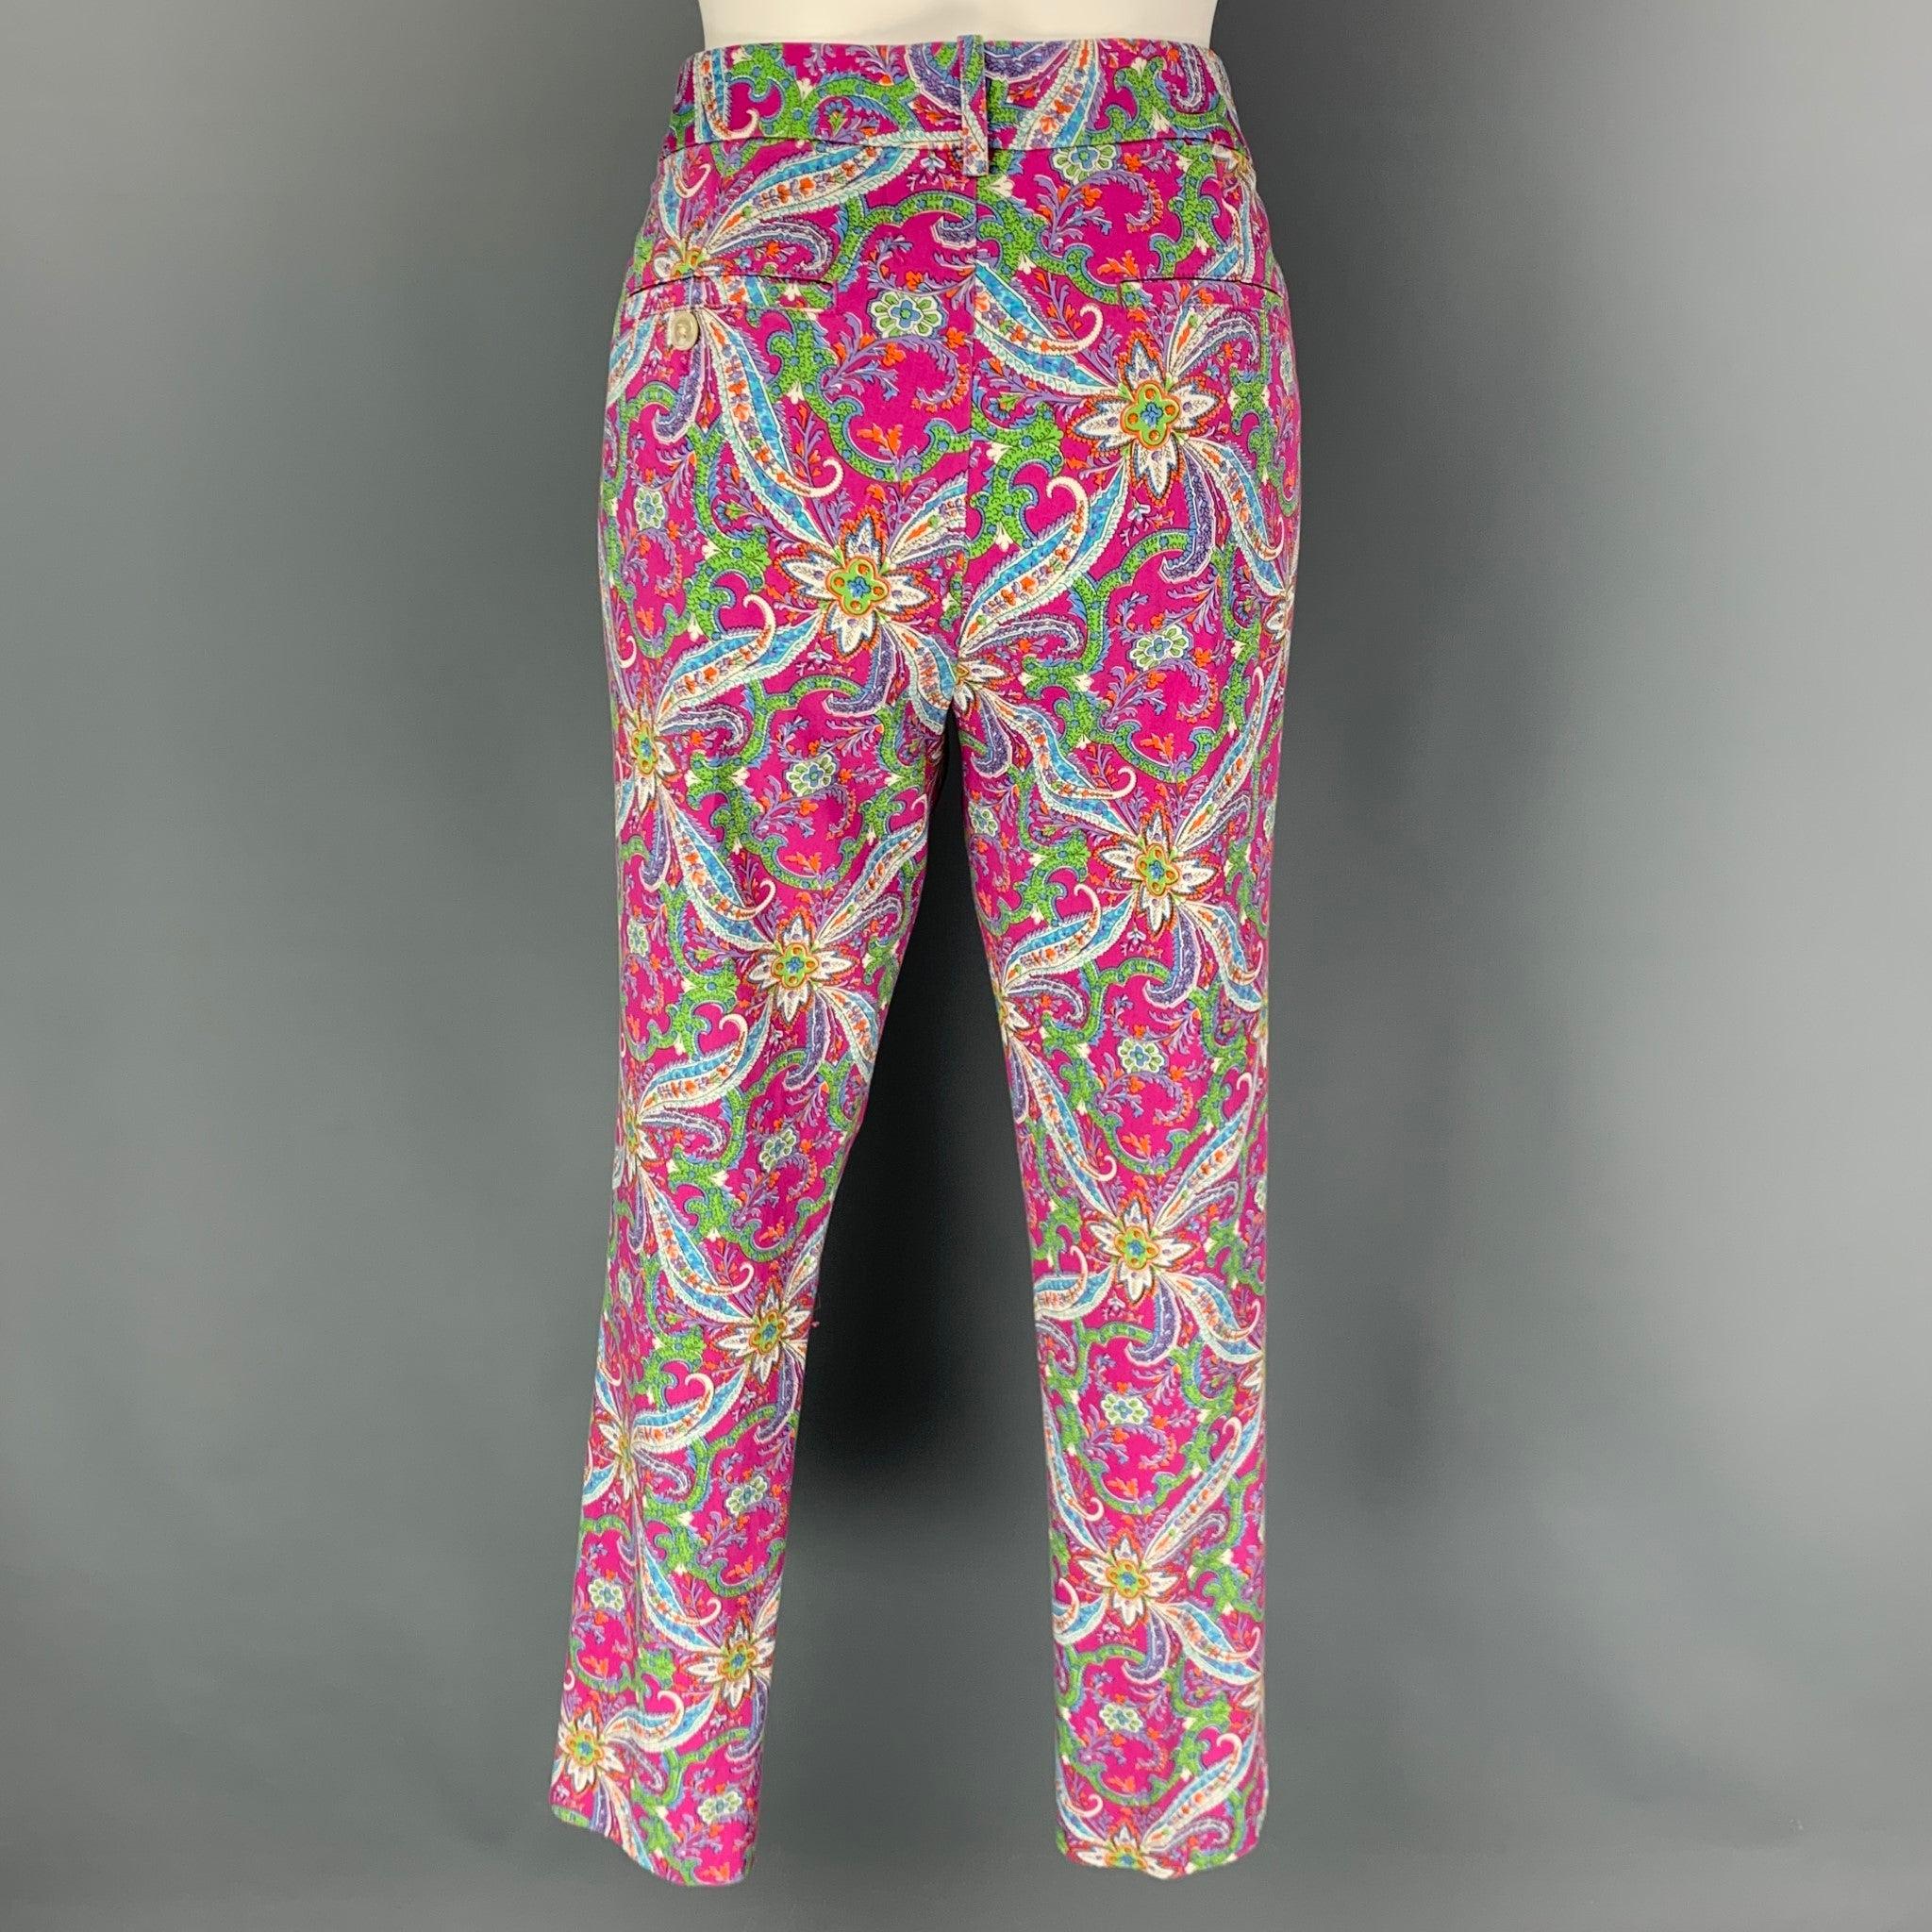 RALPH LAUREN Blue Label Size 8 Pink Multi-Color Cotton Casual Pants In Good Condition For Sale In San Francisco, CA